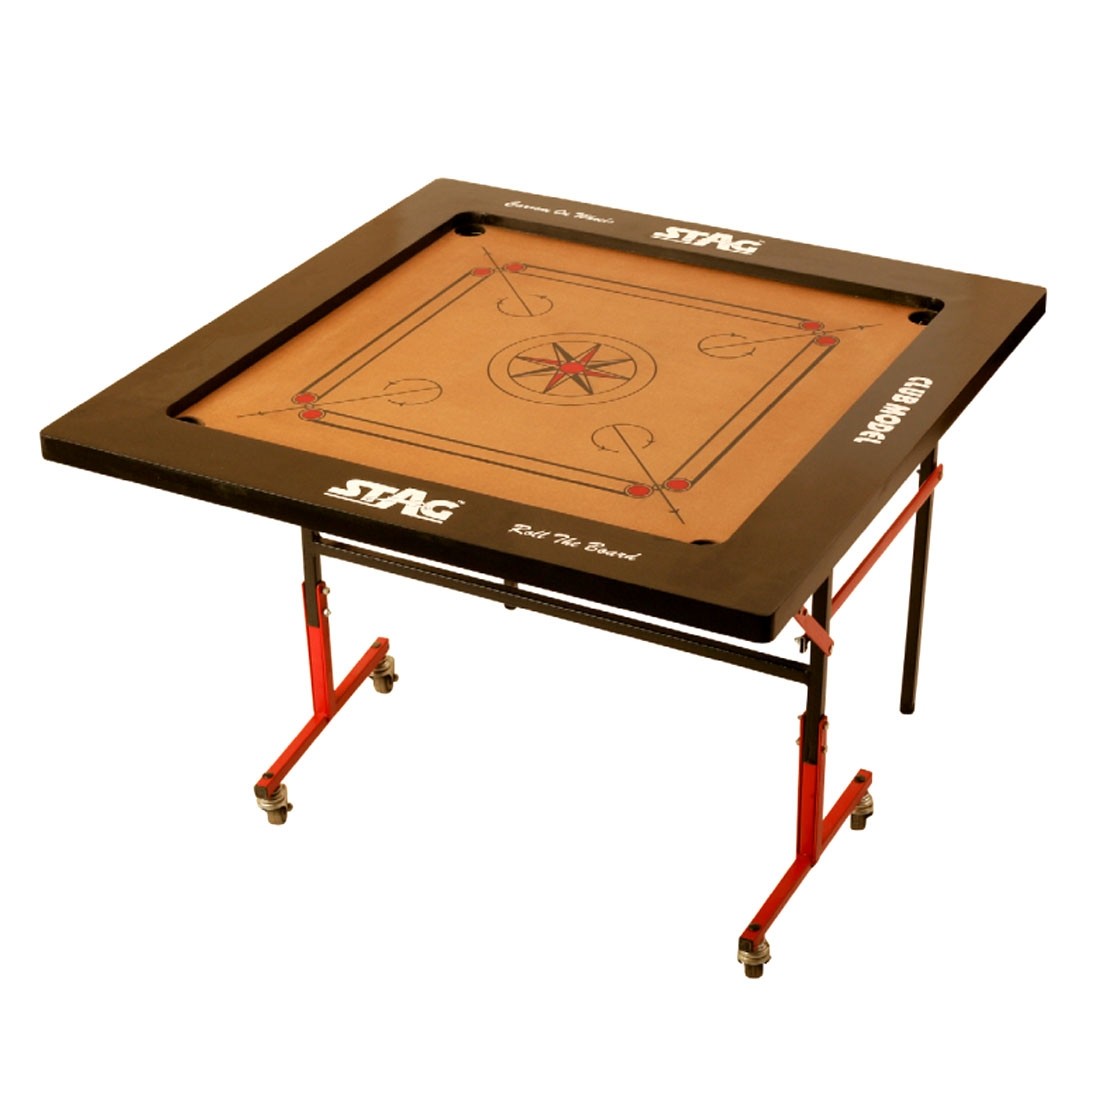 STAG CARROM BOARD CLUB 3" BORDER 6MM M.D.F. WITH LOW STAND